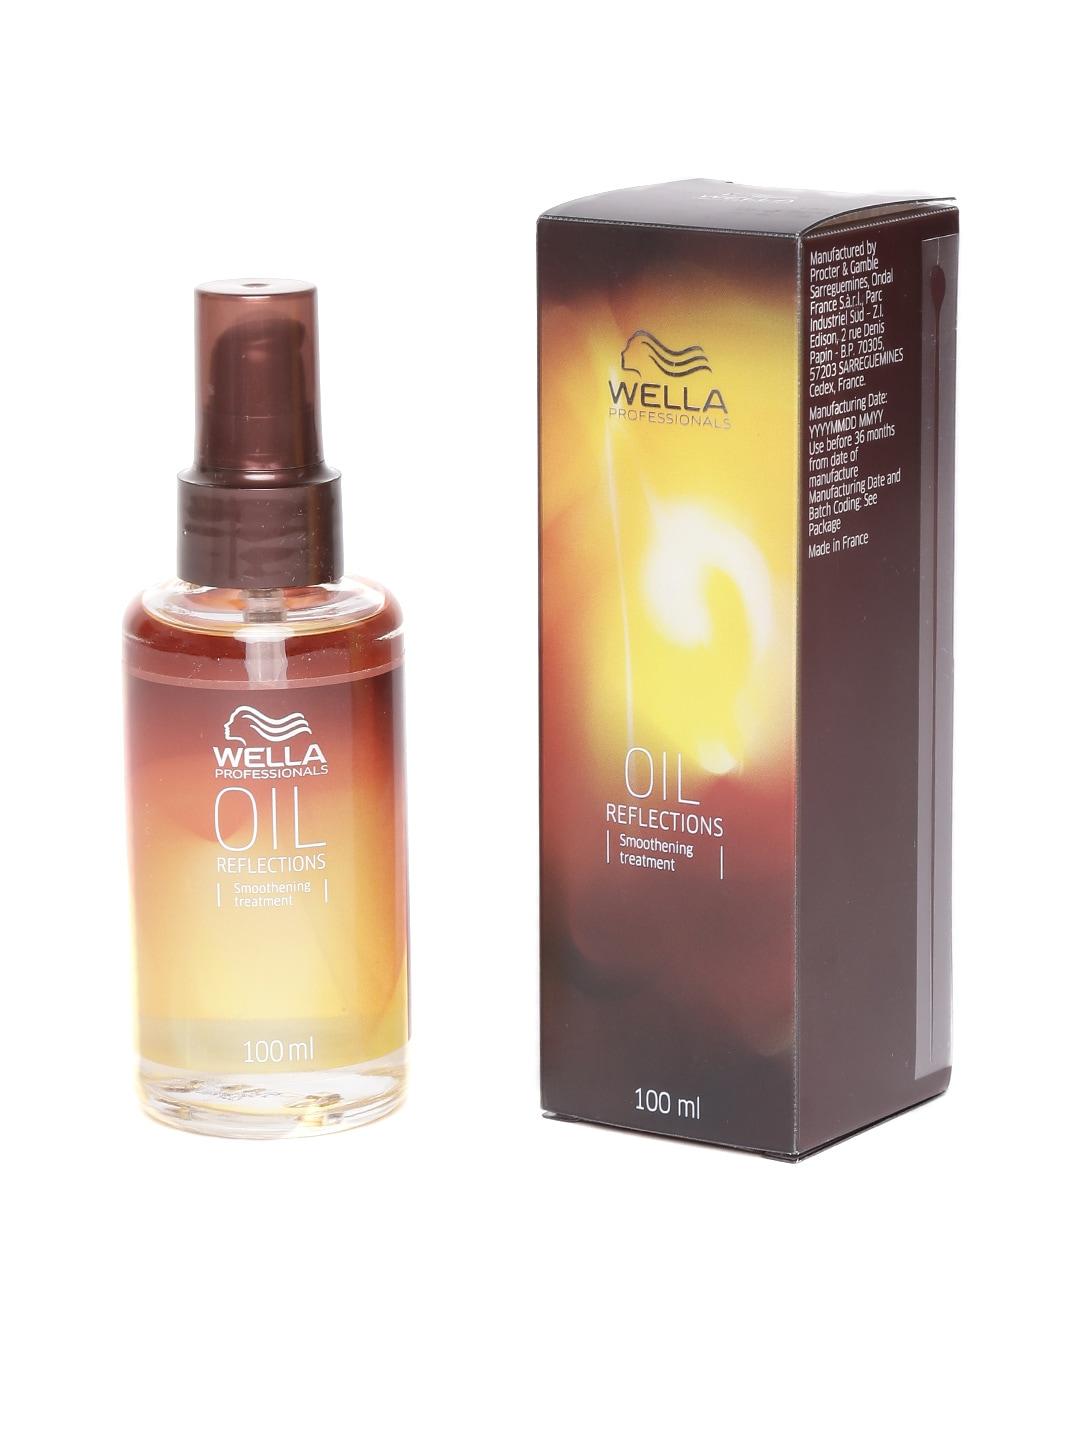 WELLA PROFESSIONALS Unisex Reflections Smoothening Treatment Oil